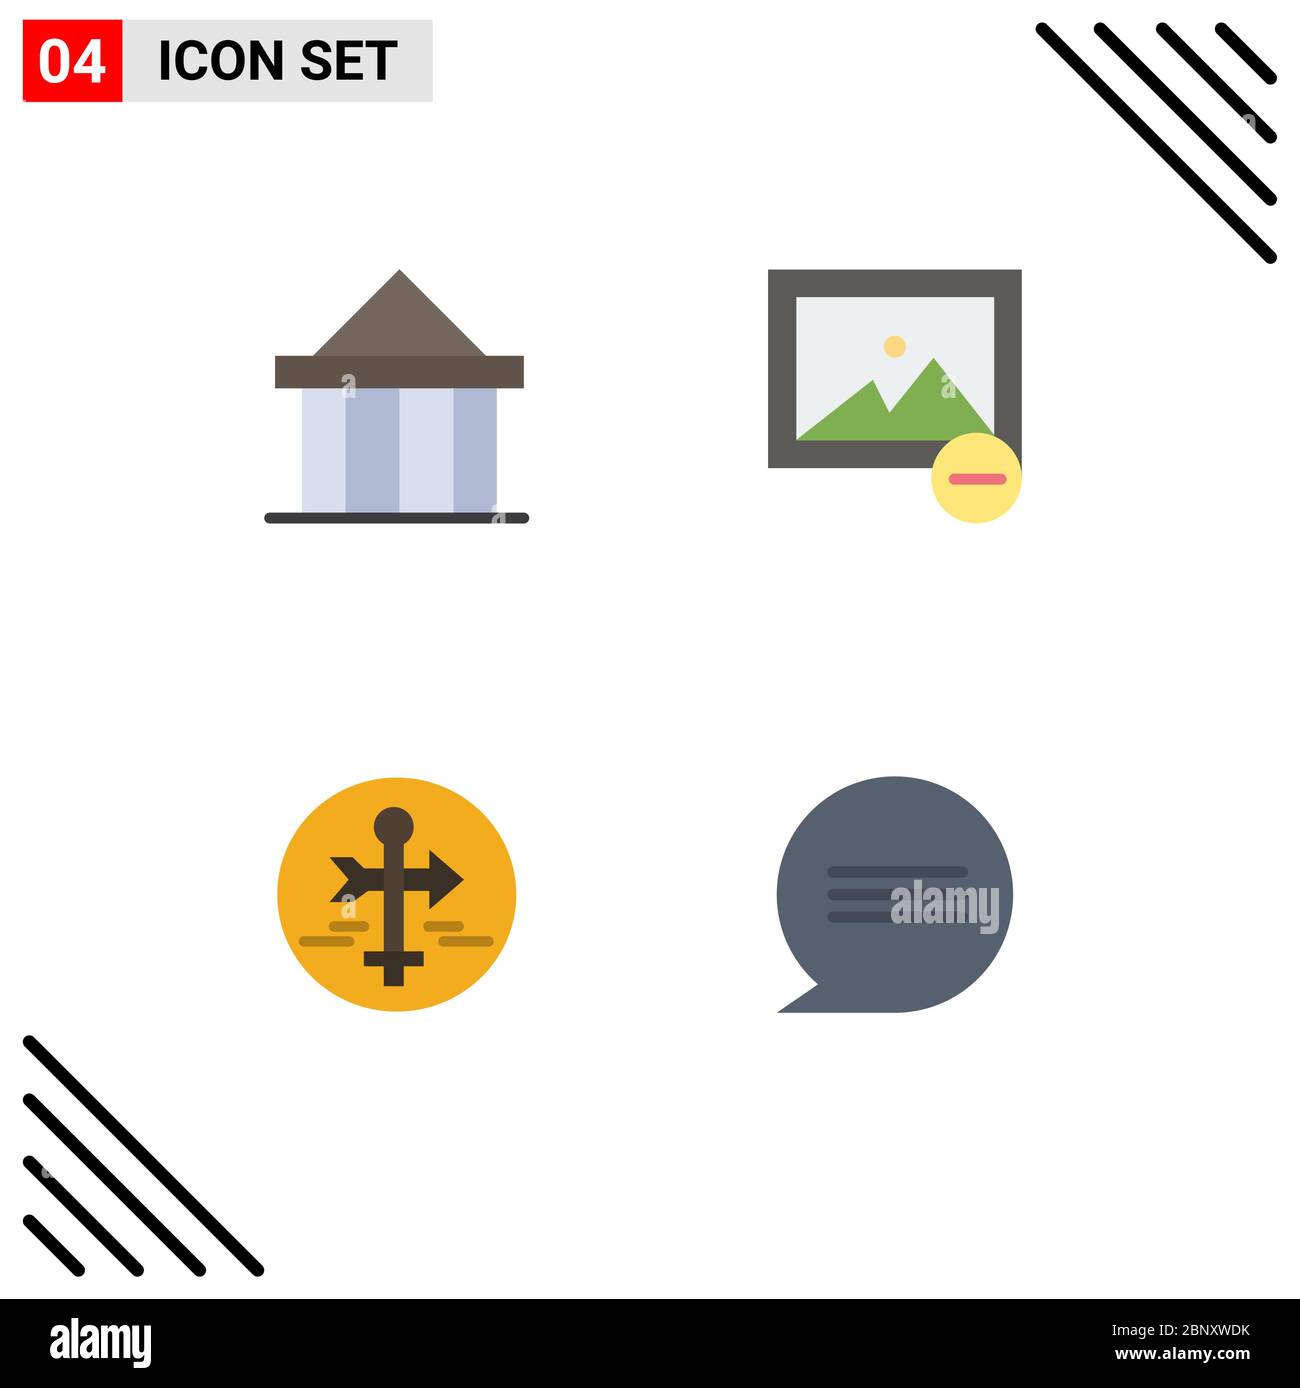 Set of 4 Vector Flat Icons on Grid for acropolis, guide, court, image, map pointer Editable Vector Design Elements Stock Vector